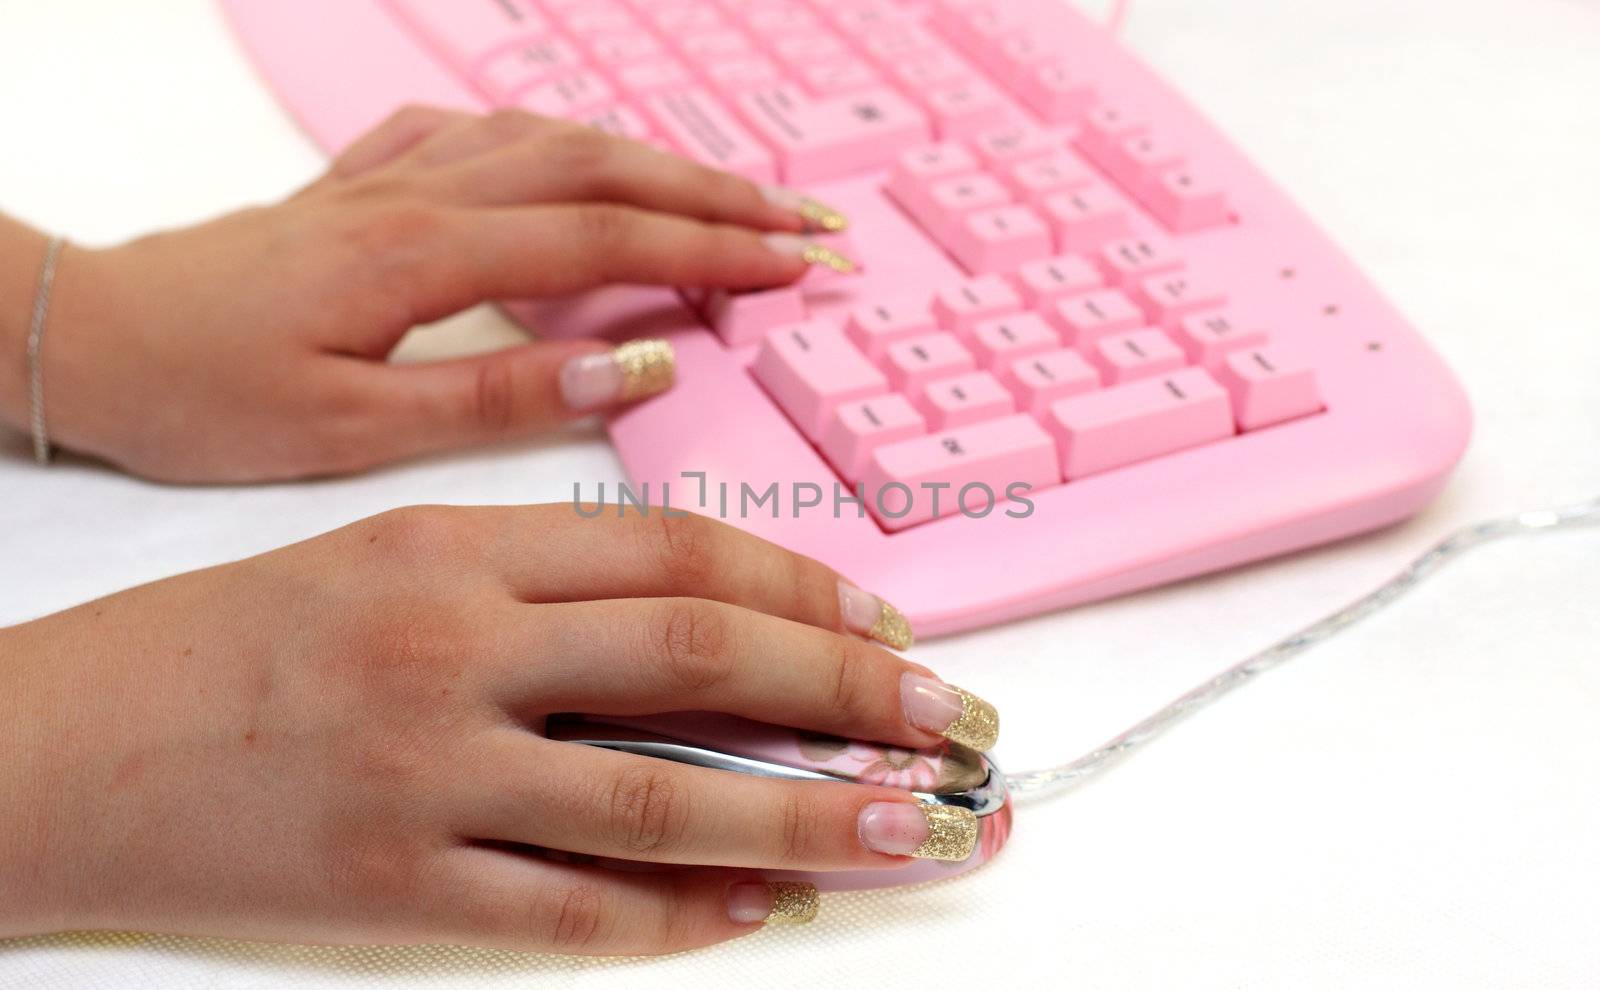 Hands of the girl on keyboard and mouse by fedlog